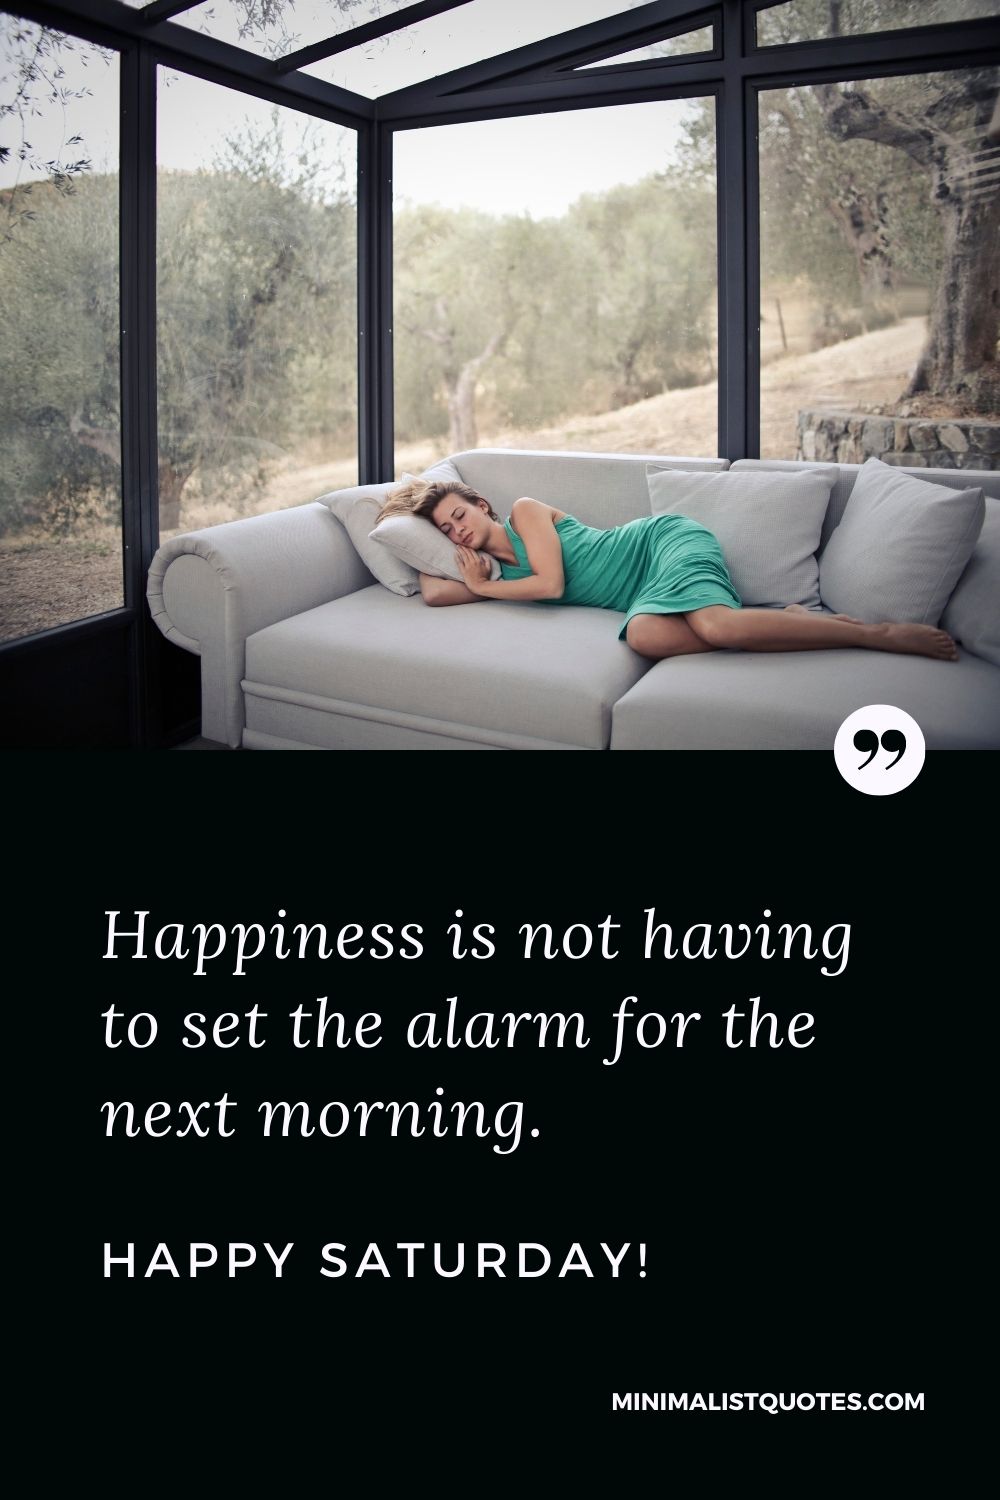 Saturday Quote, Wish & Message With Image: Happiness is not having to set the alarm for the next morning. Happy Saturday!